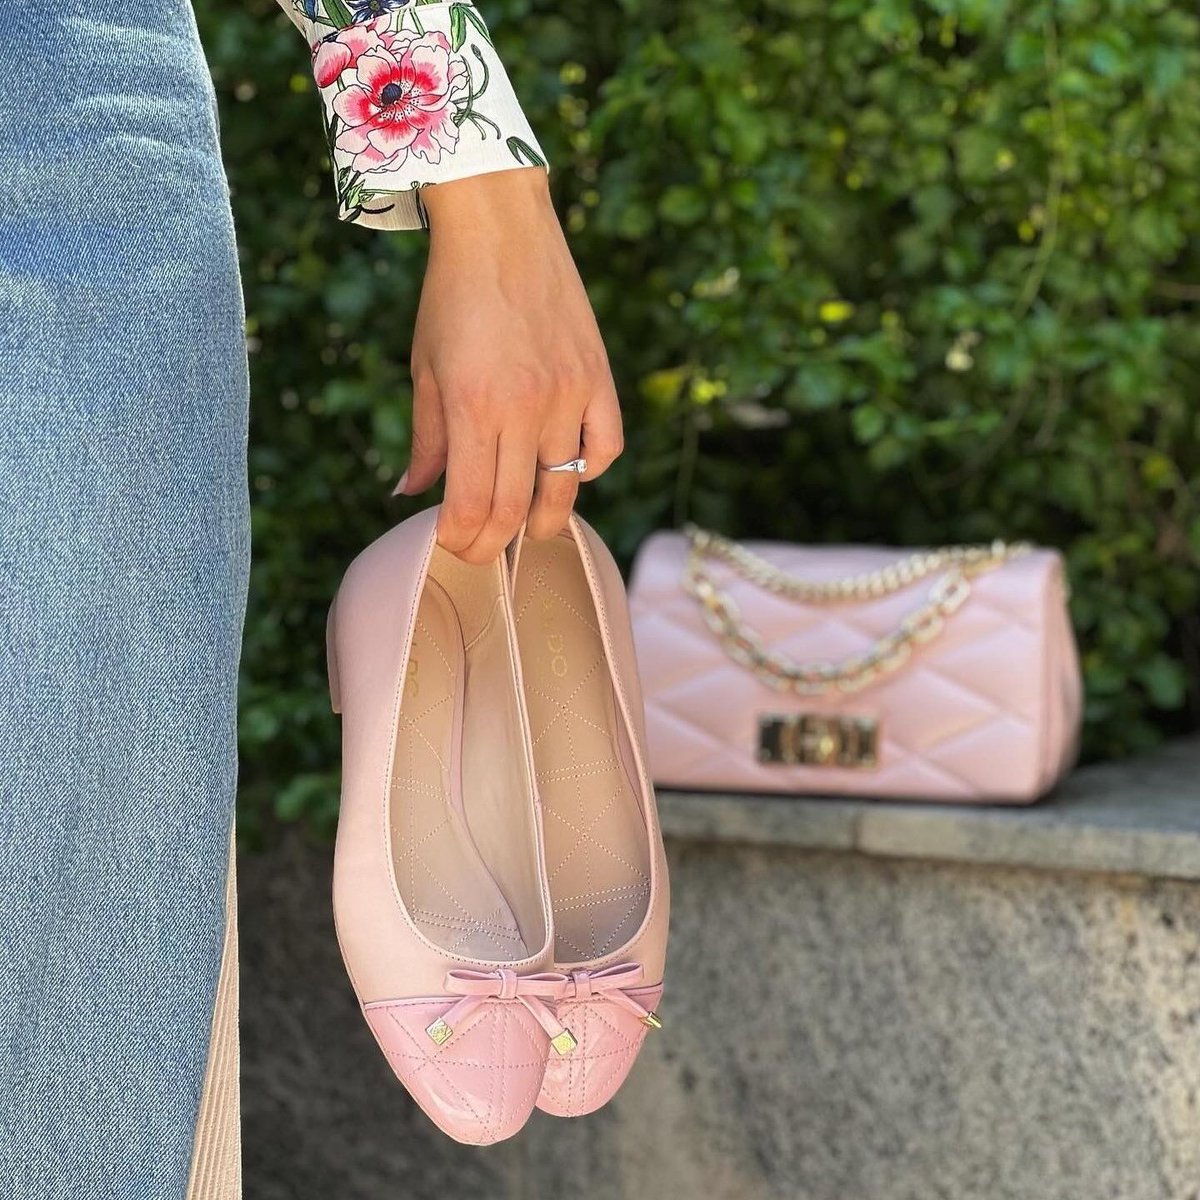 We love all the soft pink moments and ballet flats. 💞 Find your favorite perfect fit at Aldo Shoes. ✨🩰